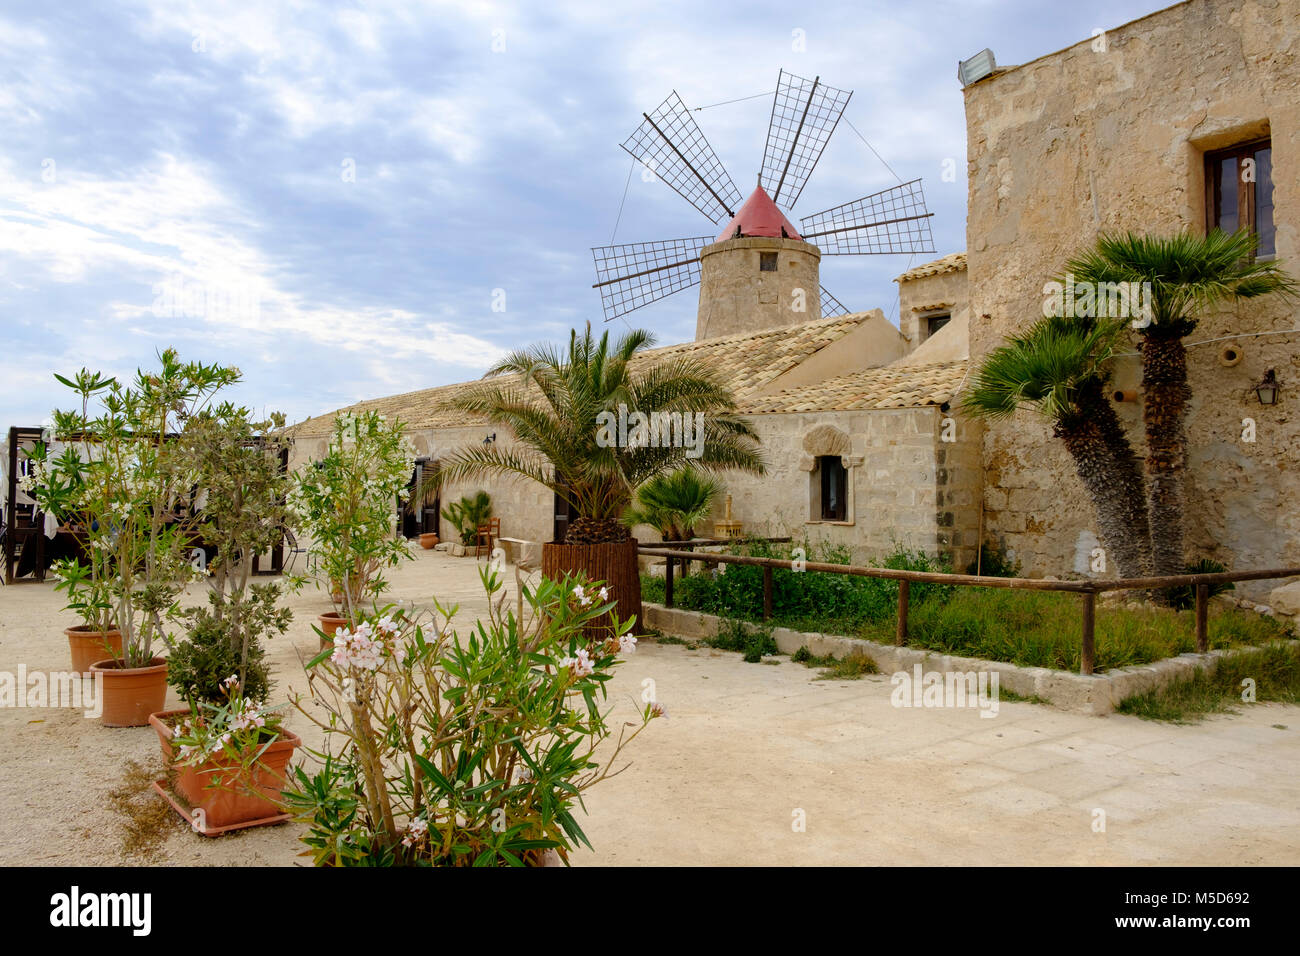 Museo del Sale, Salt Museum with Windmill, saltworks Culcasi, Via del Sale, Salt Road, Nubia, Province of Trapani, Sicily, Italy Stock Photo